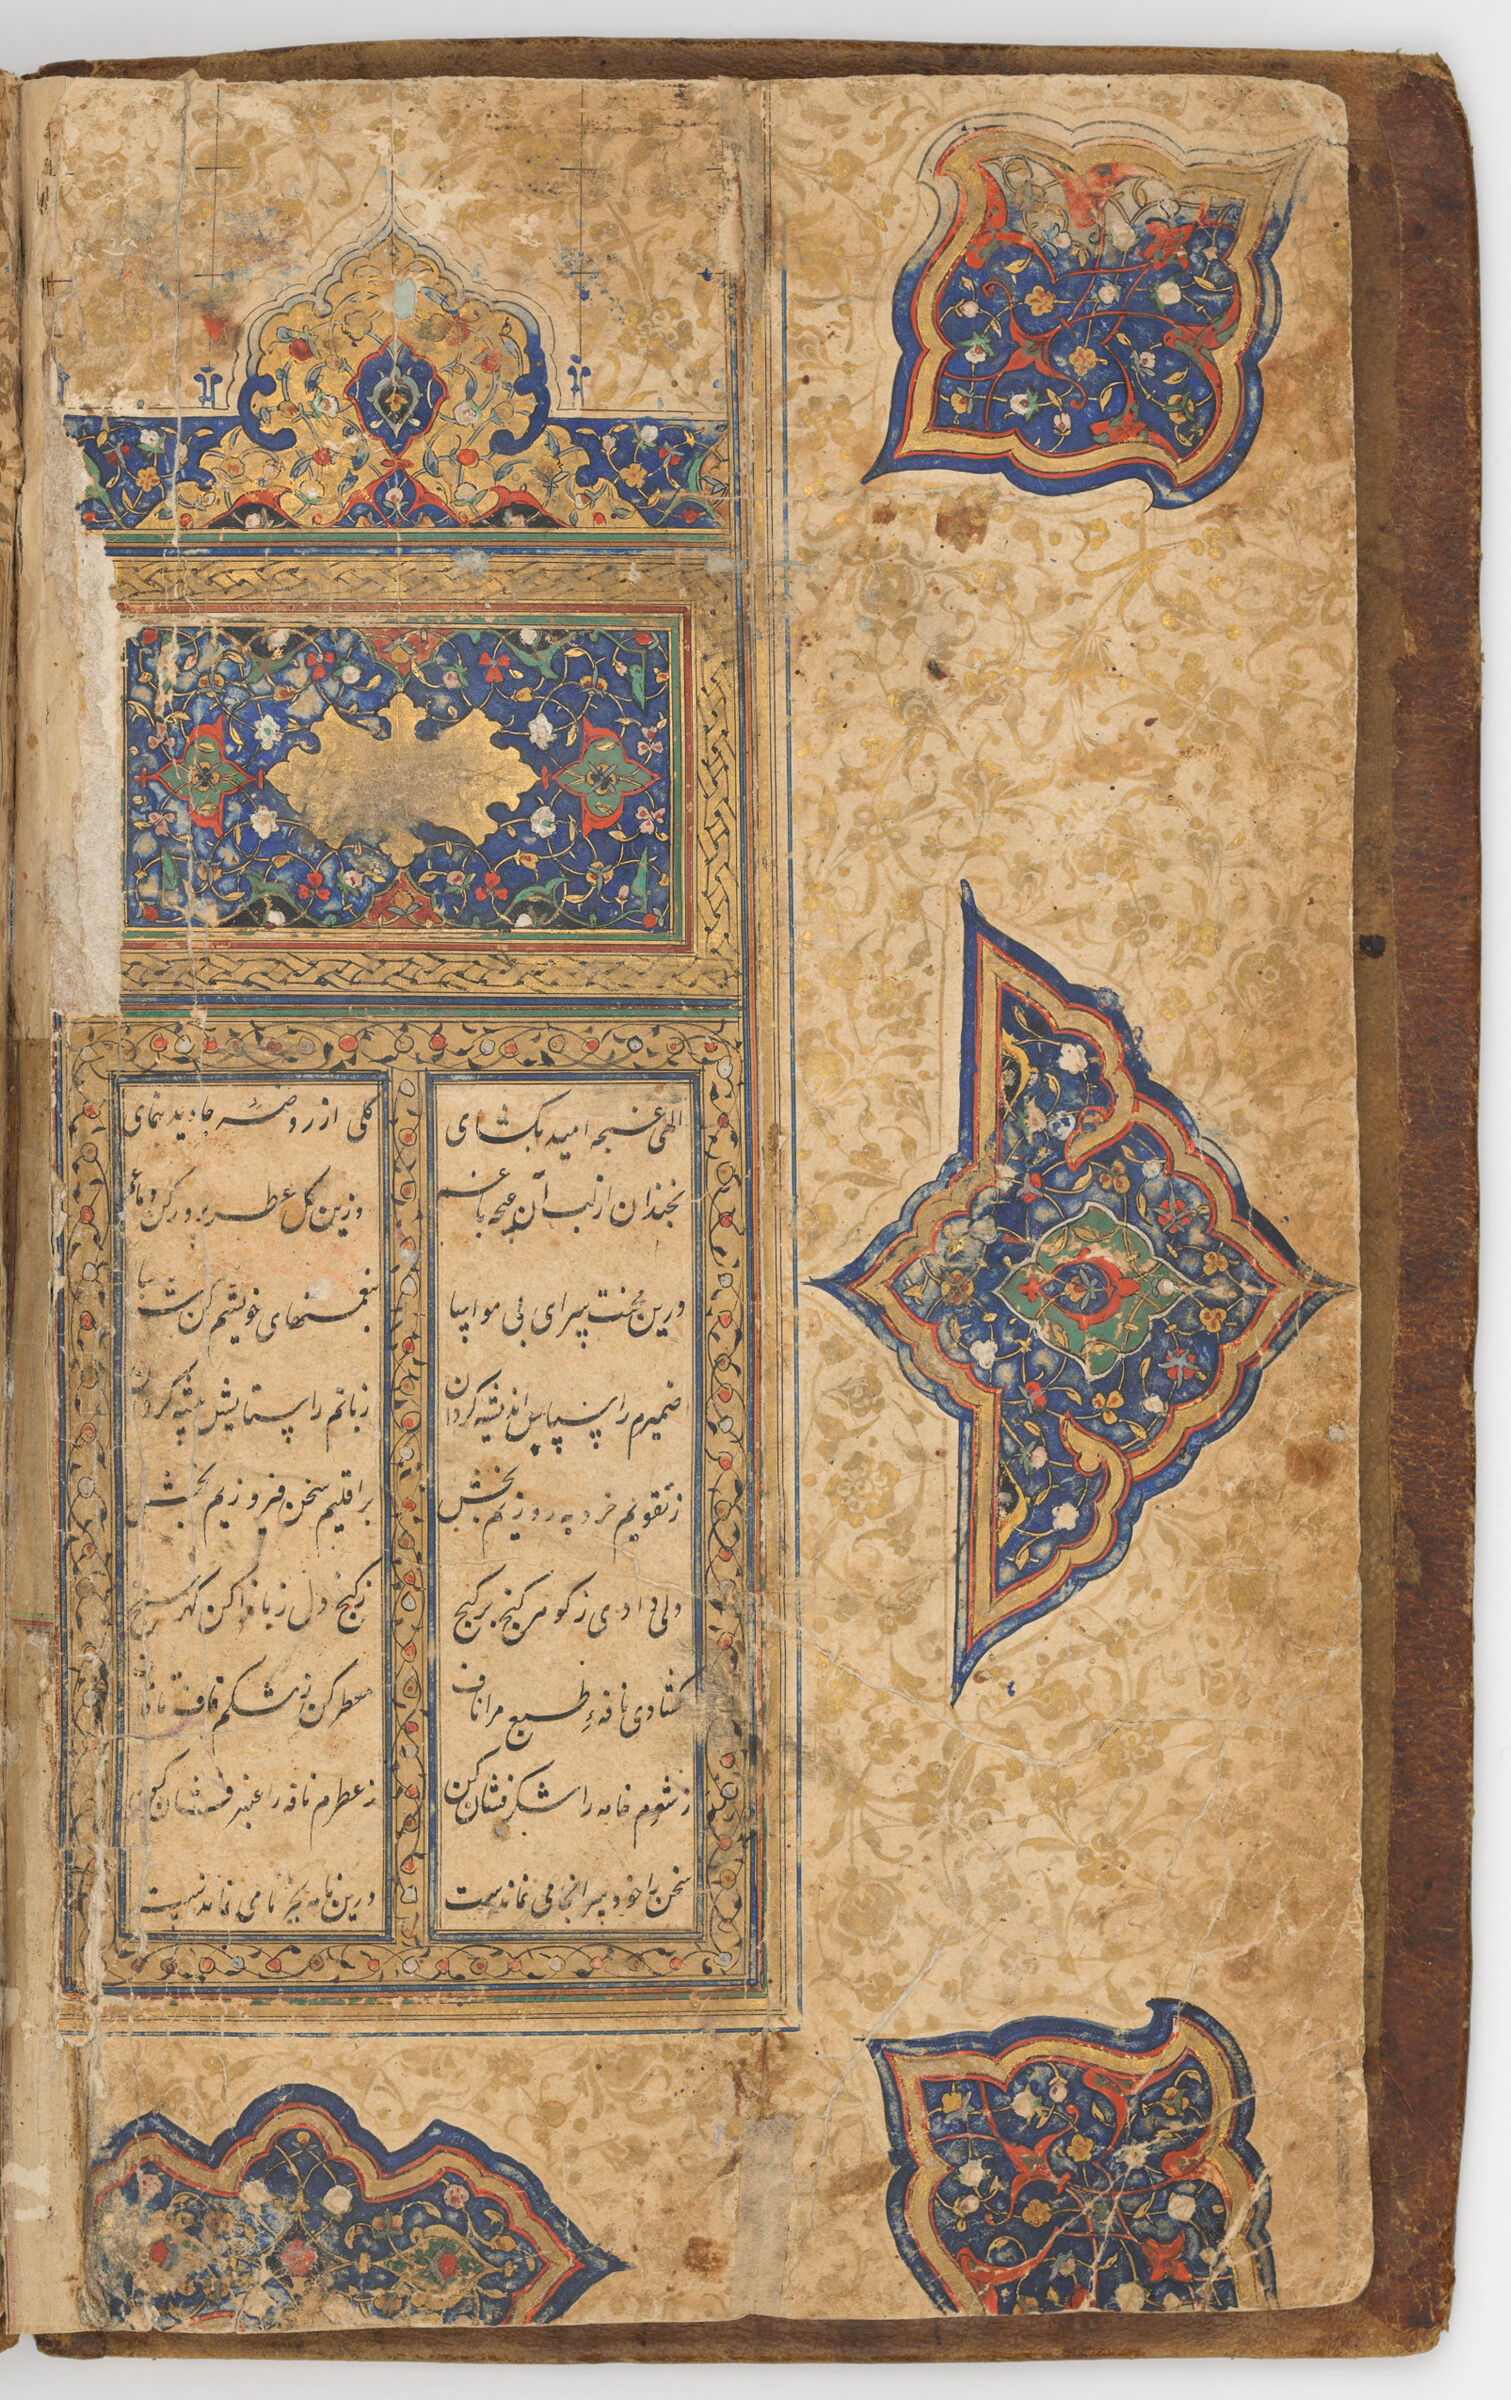 Folio With Notes In Later Hands; Illuminated Sarlawh And Decorated Margins (Notes Recto; Sarlawh Verso Of Folio 1) Frontispiece From A Manuscript Of Yusuf And Zulaykha By Nizami